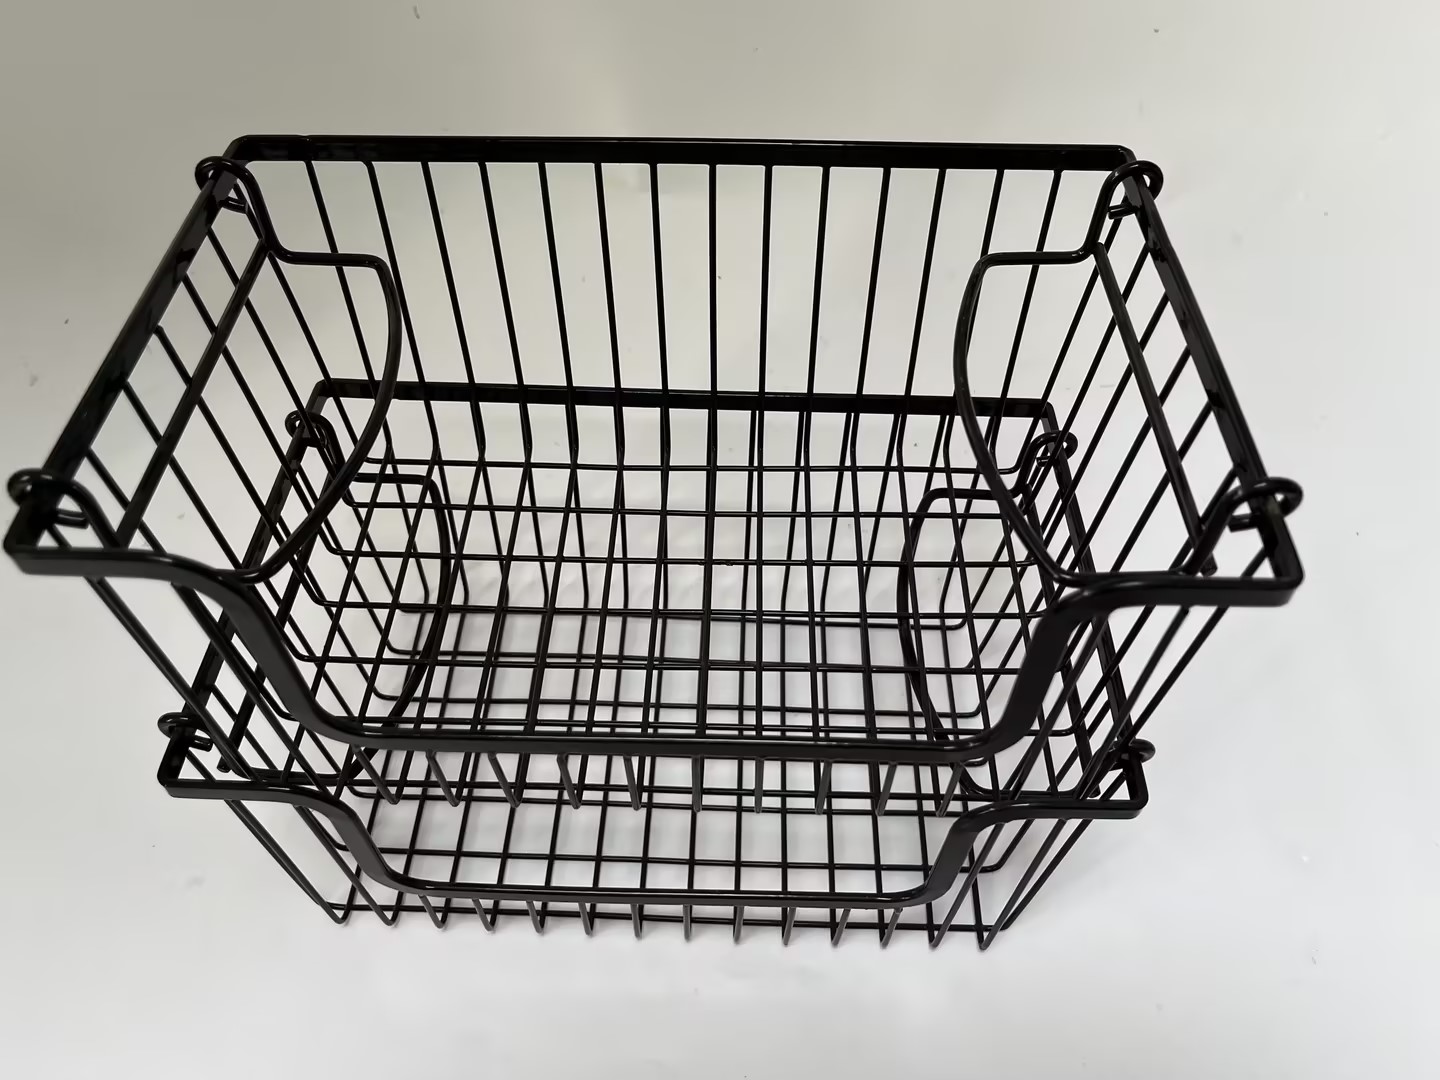 Topsome Baskets for Household Purposes Wire Baskets for Organizing Household Pantry Baskets 2 Pack Metal Baskets for Pantry Storage Wire Storage Baskets Black Metal Storage Bins